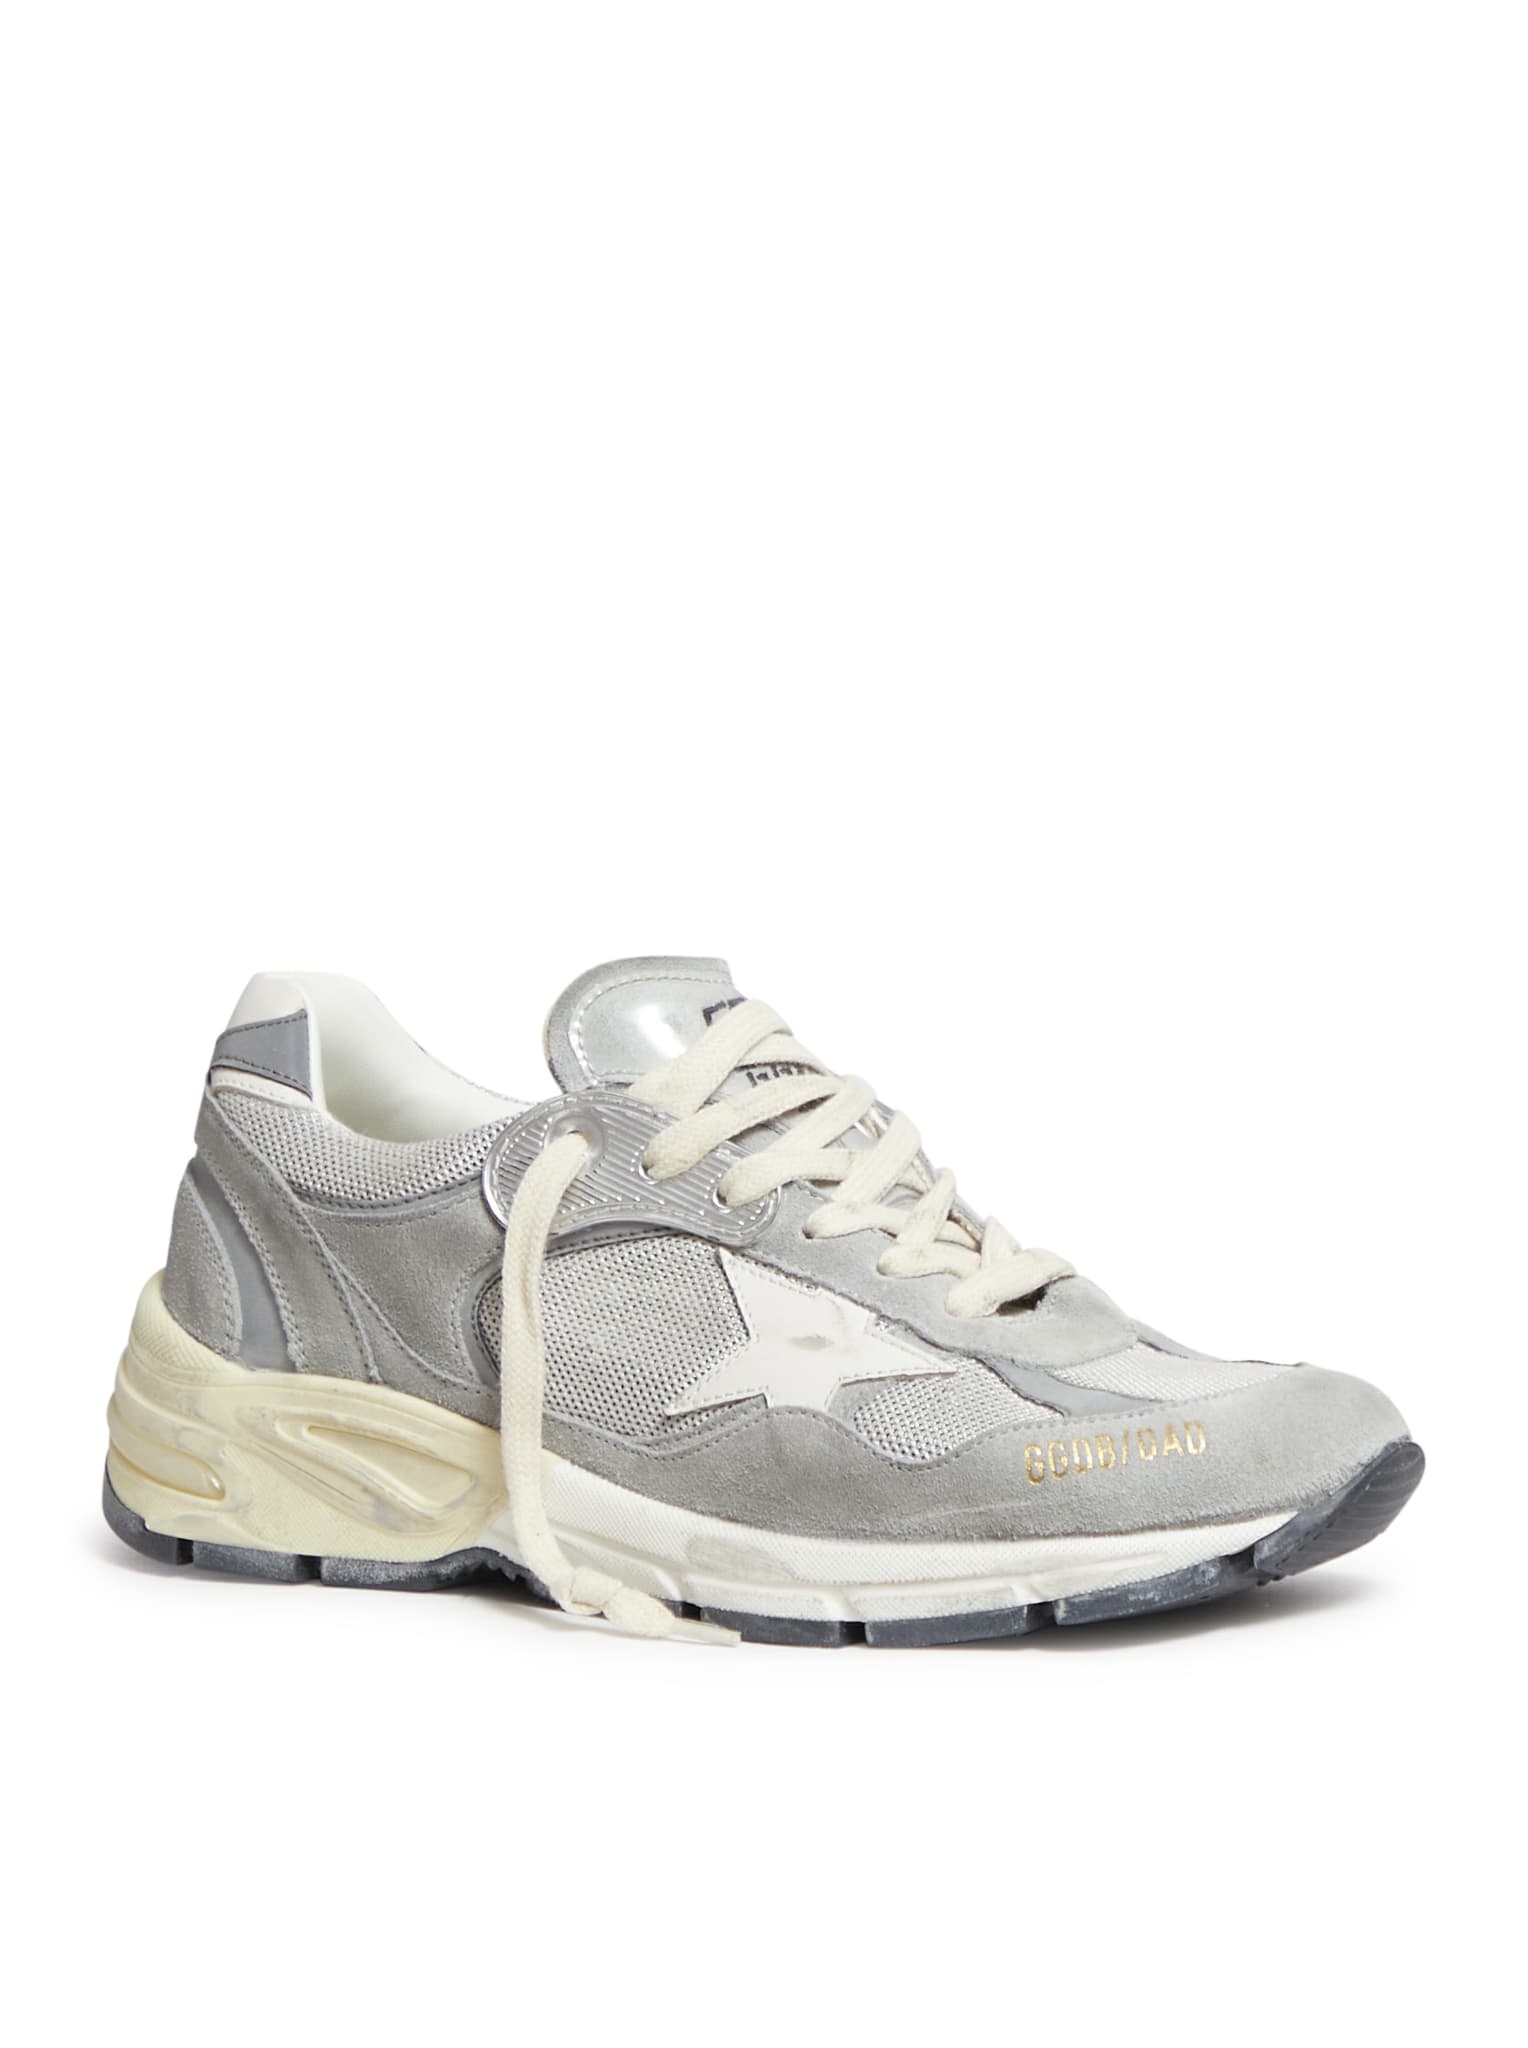 Shop Golden Goose Running Dad Net Upper Suede Toe And Spur Leather Star In Grey Silver White